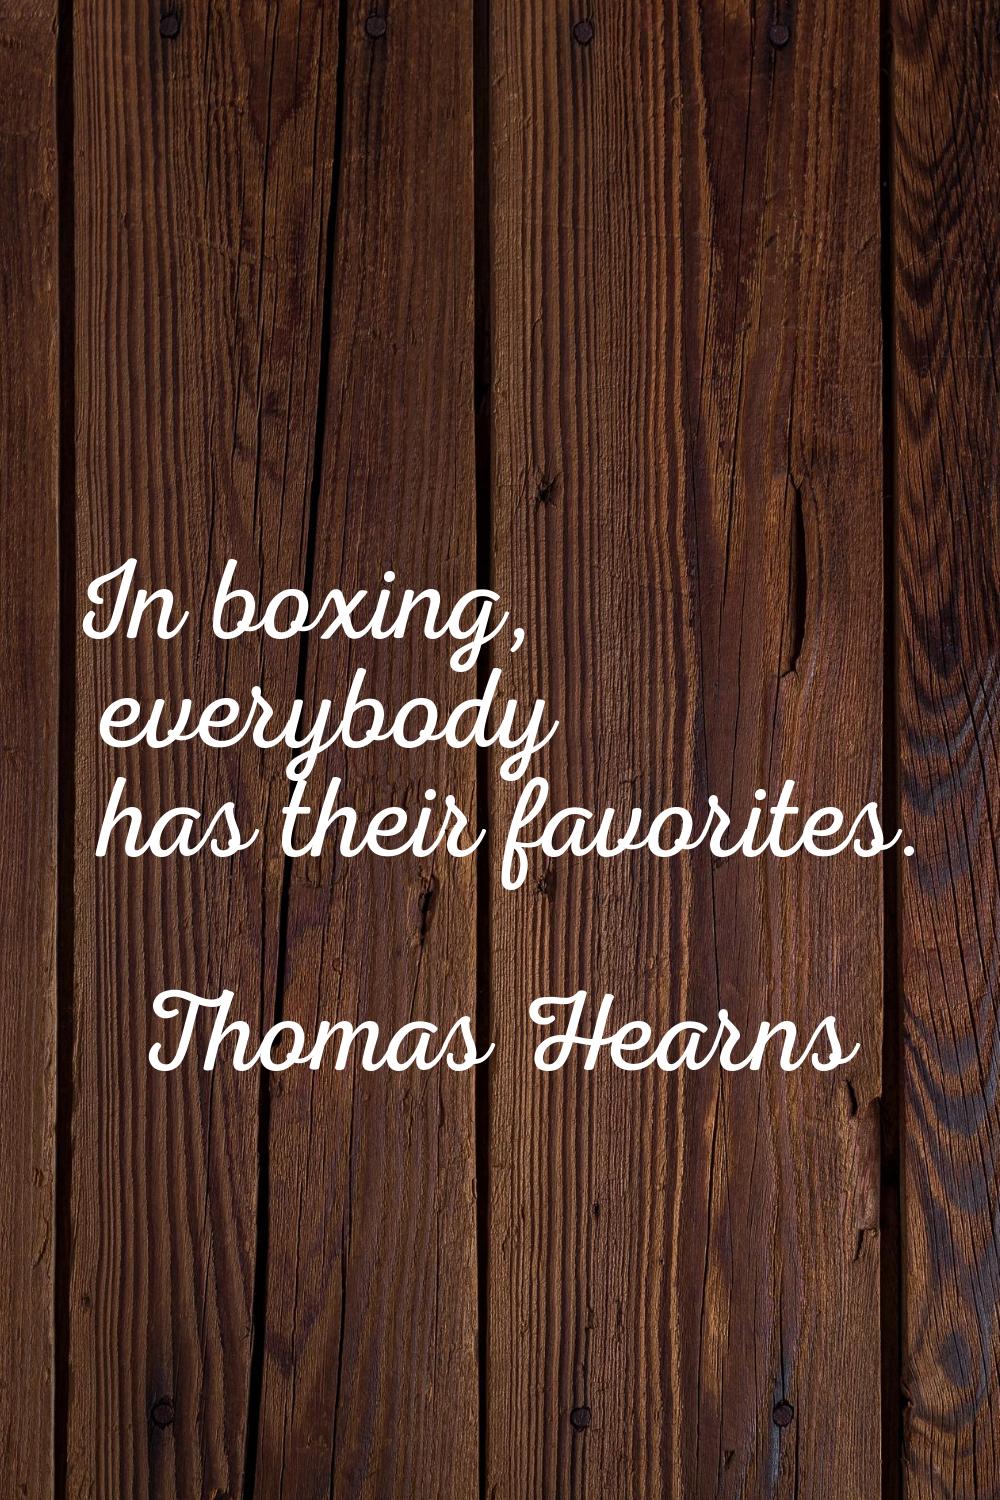 In boxing, everybody has their favorites.